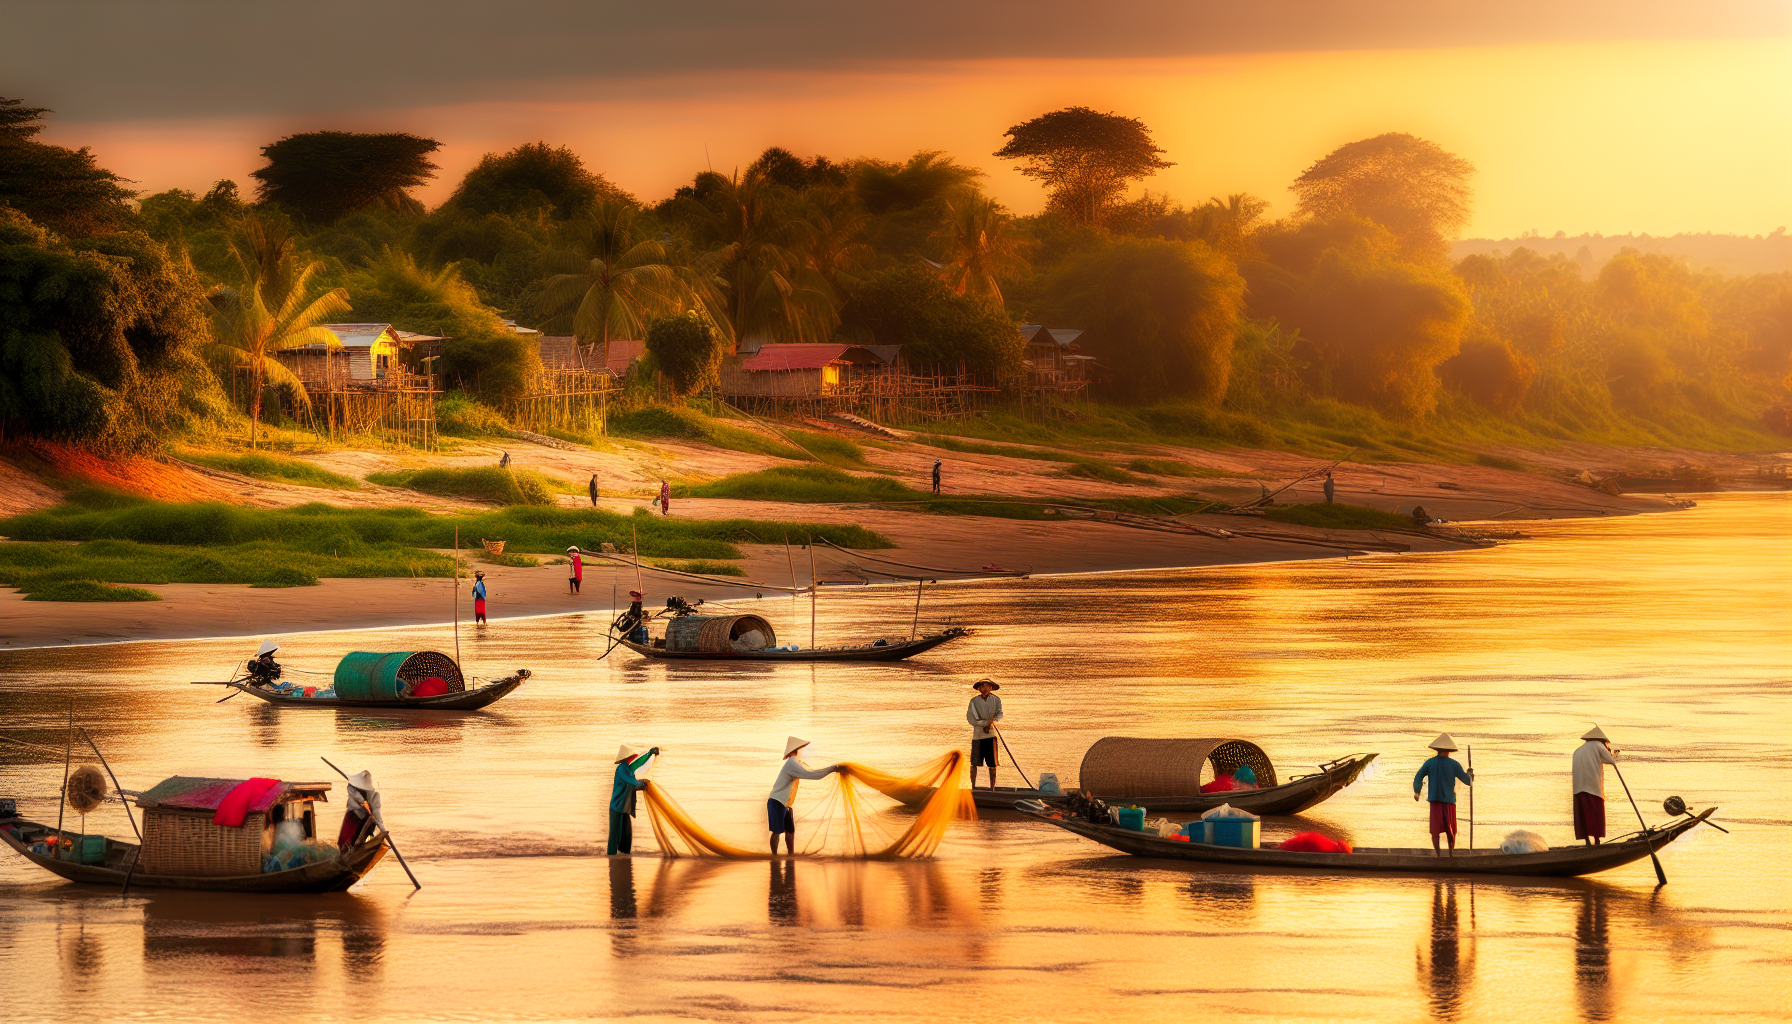 Scenic view of the Mekong River with traditional boats and lush landscapes